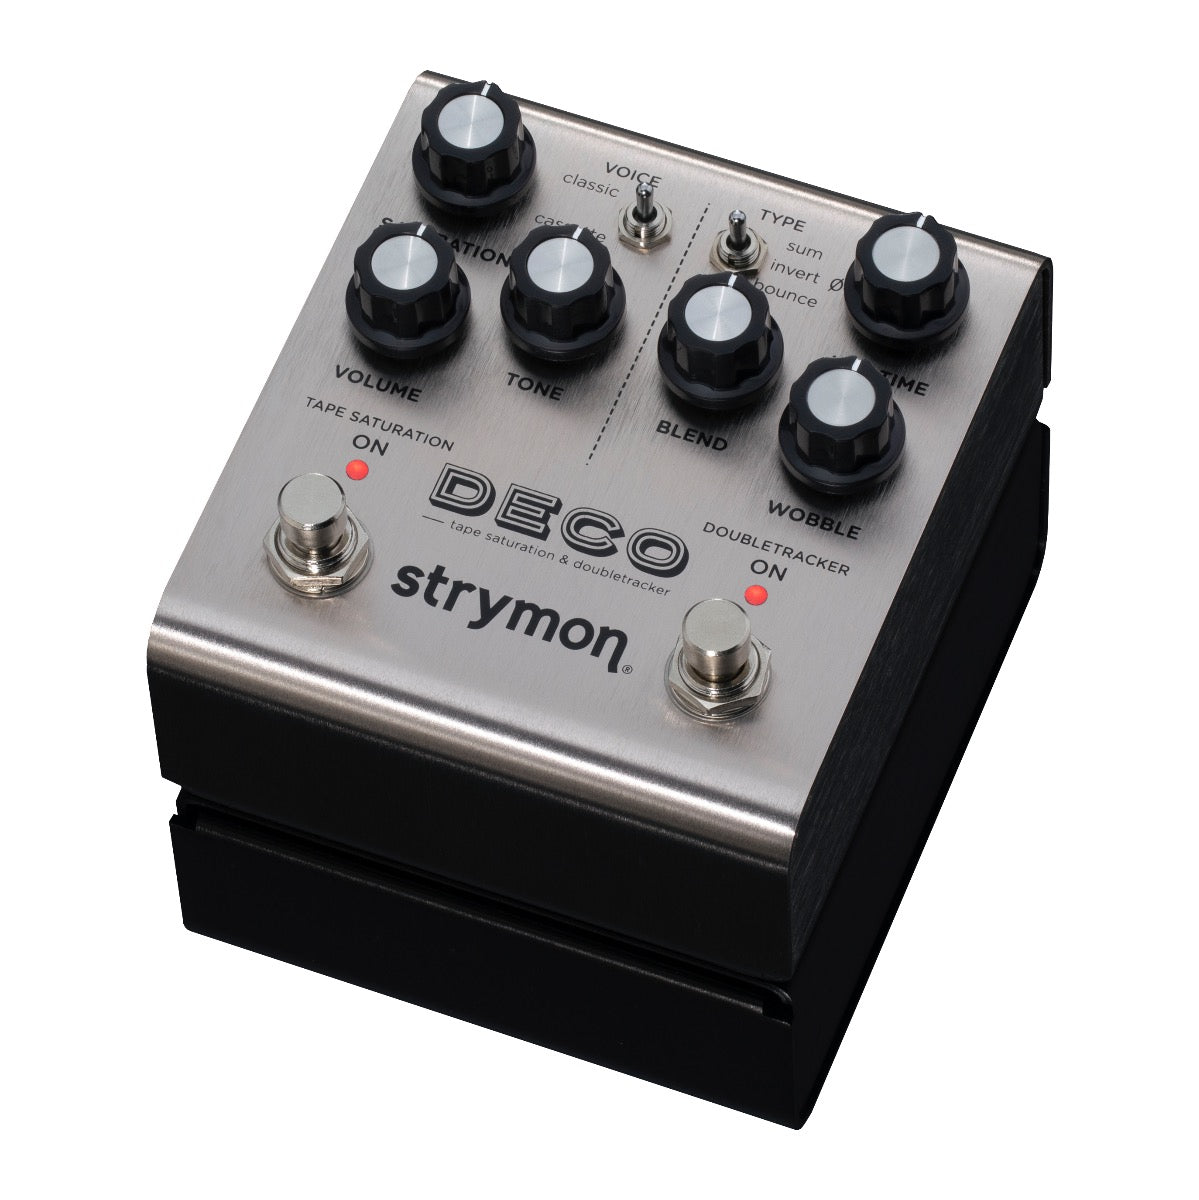 Strymon Deco V2 Tape Saturation and Doubletracker Pedal, View 1